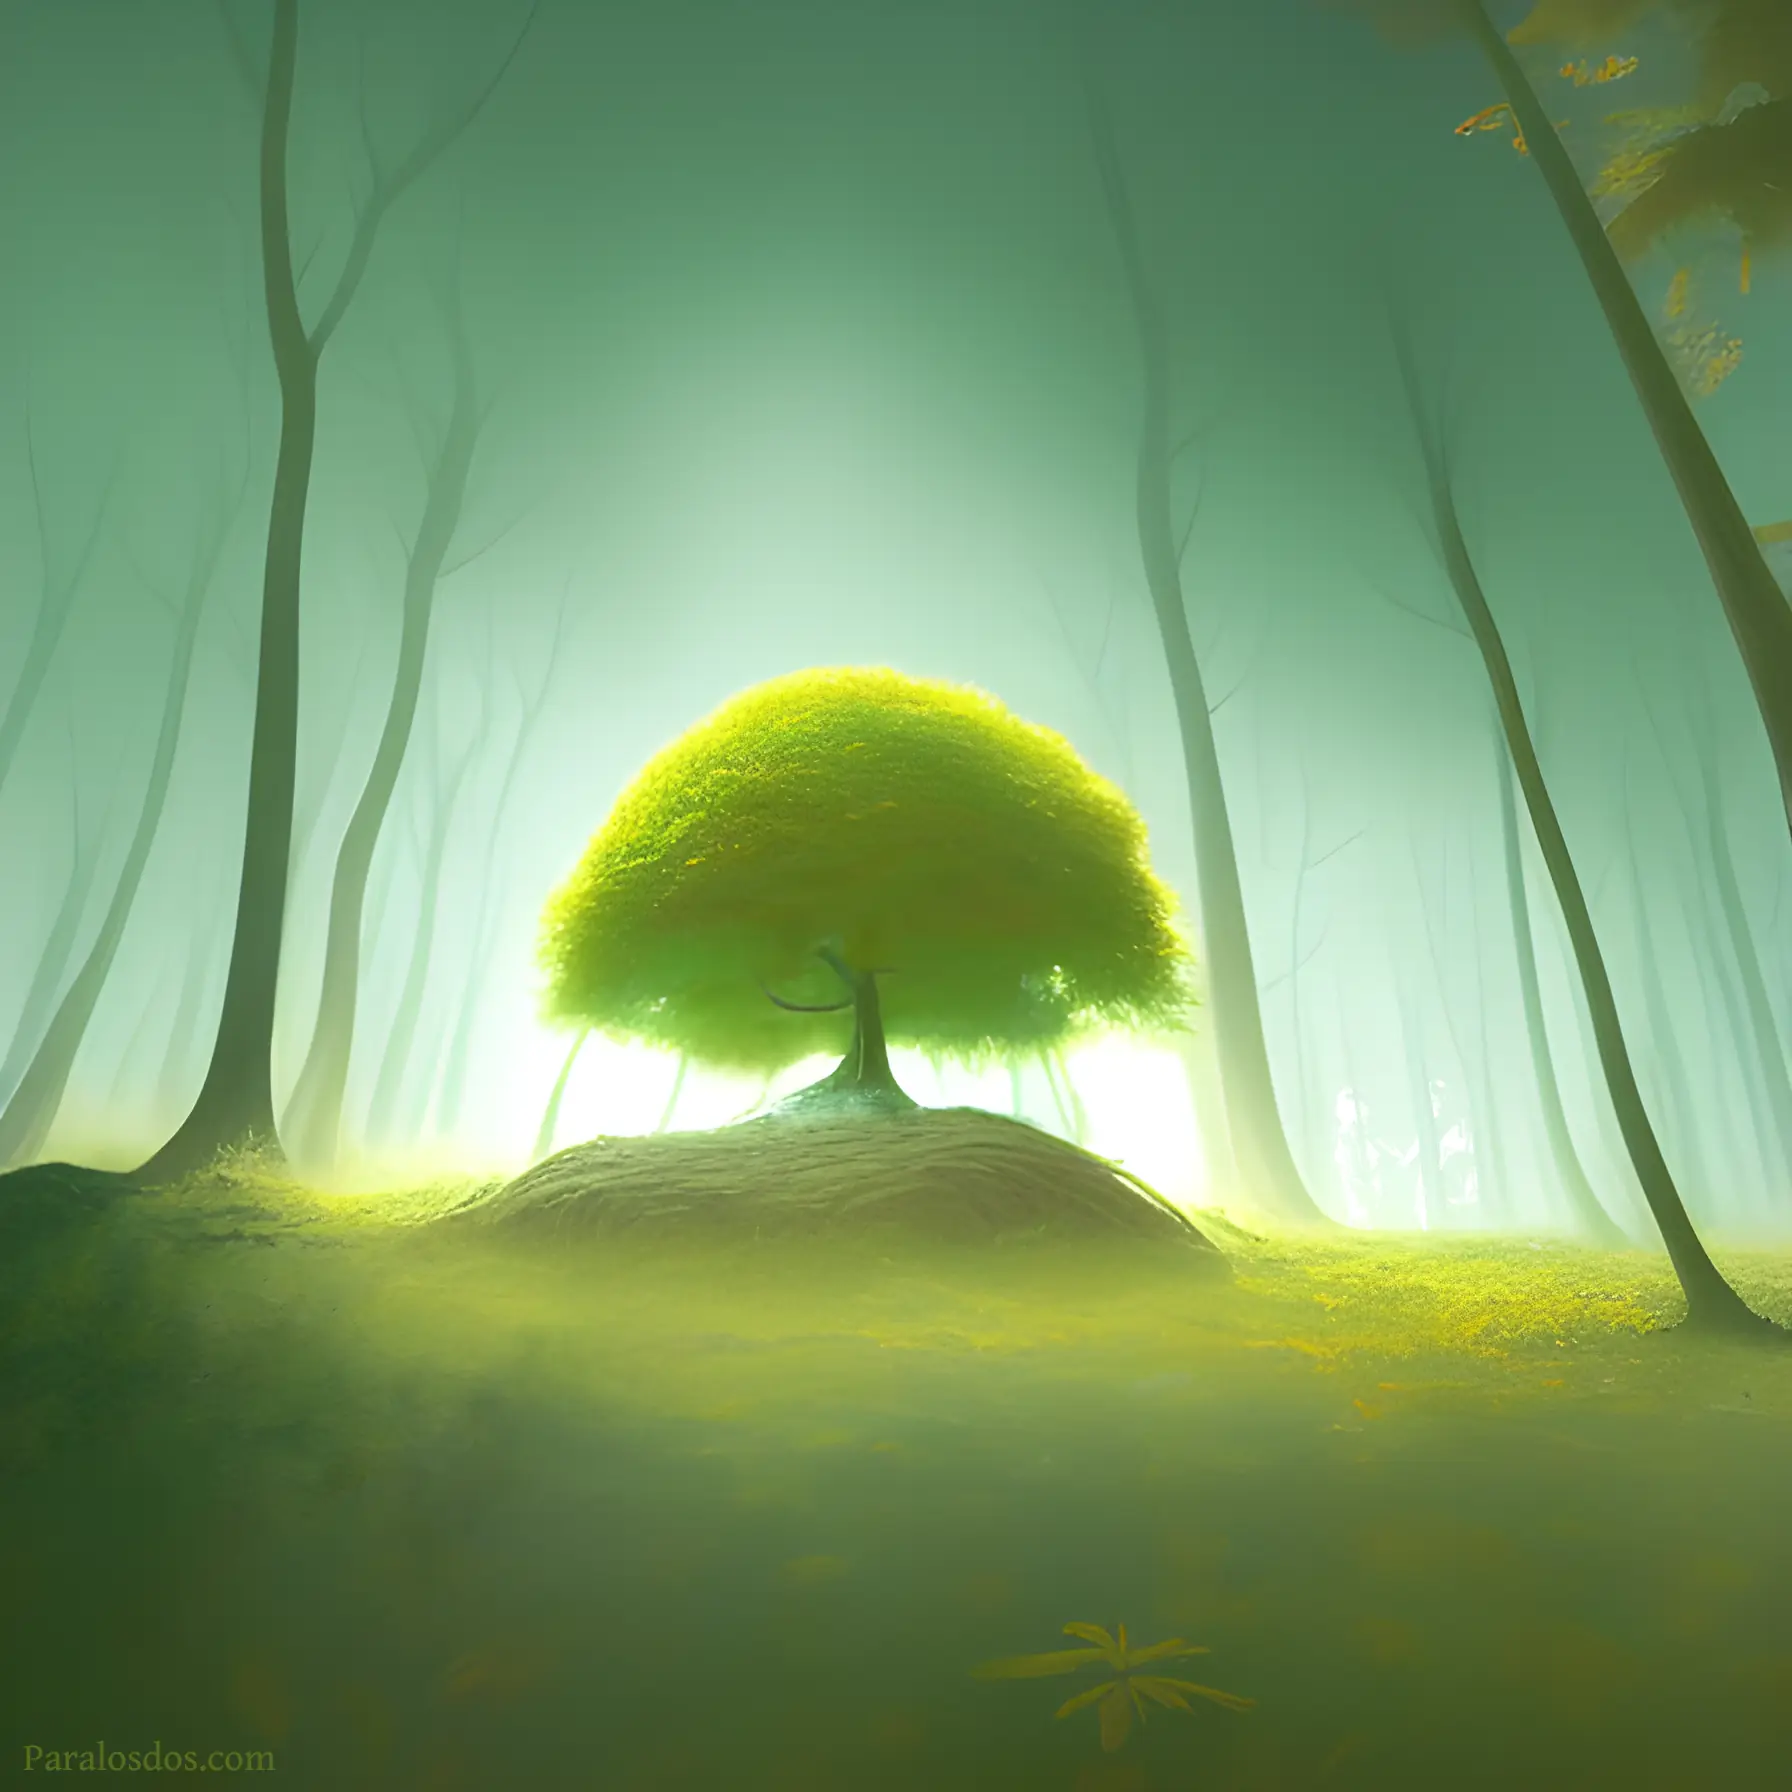 An artistic rendering of a lone bell shaped tree backlit in a forest of tall thin trees.